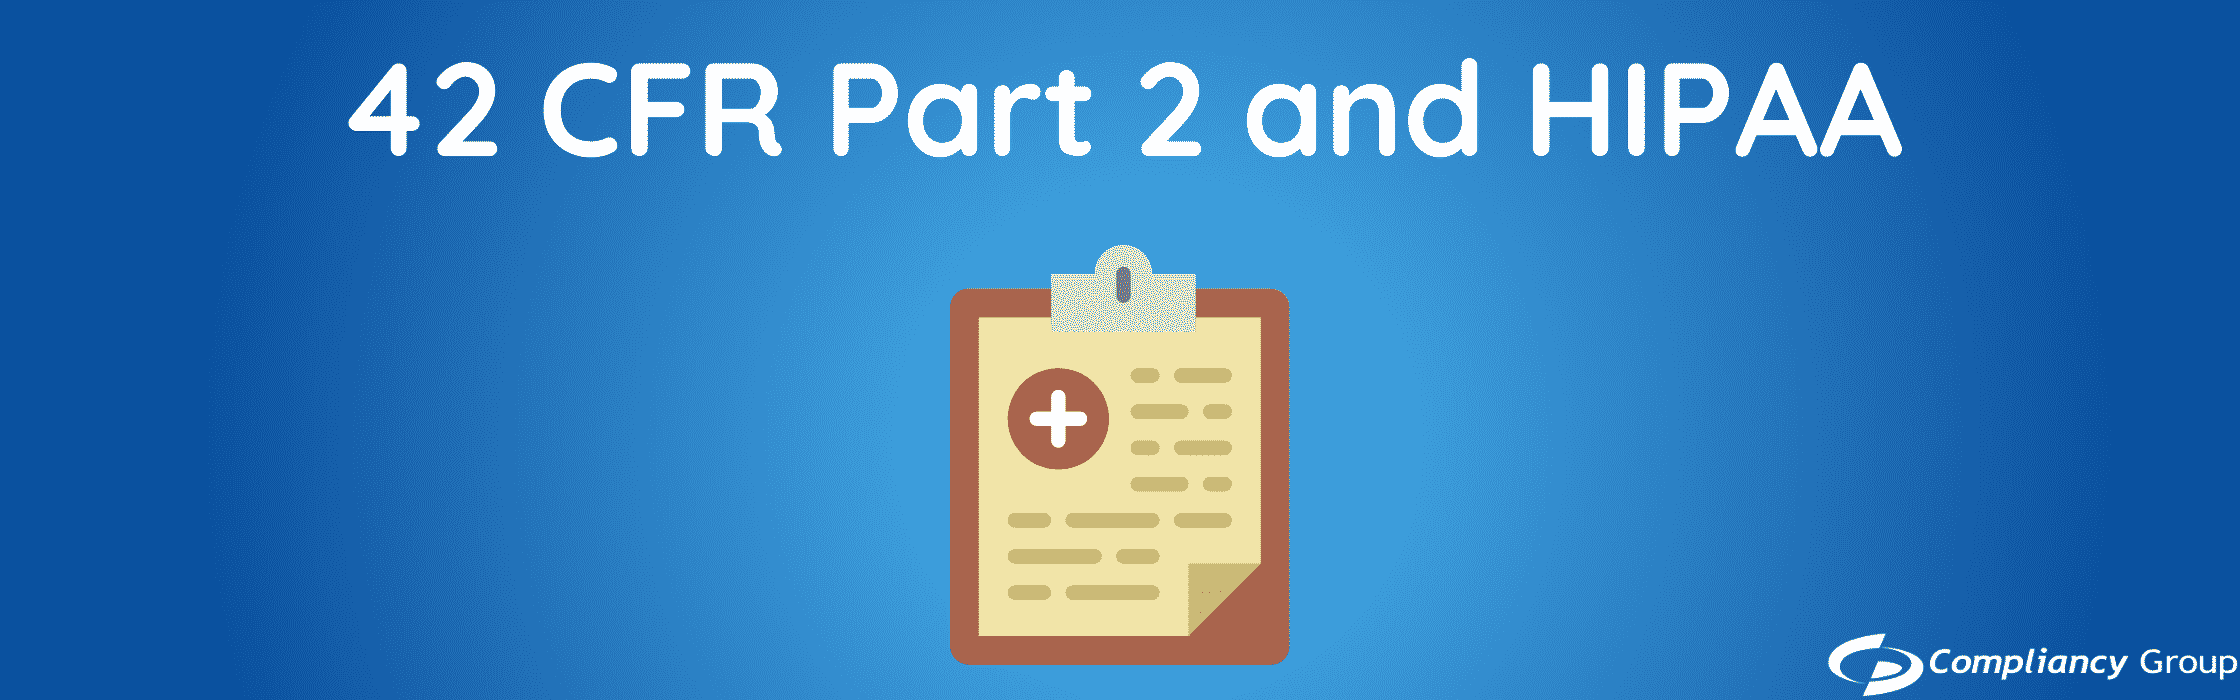 42 CFR Part 2 and HIPAA